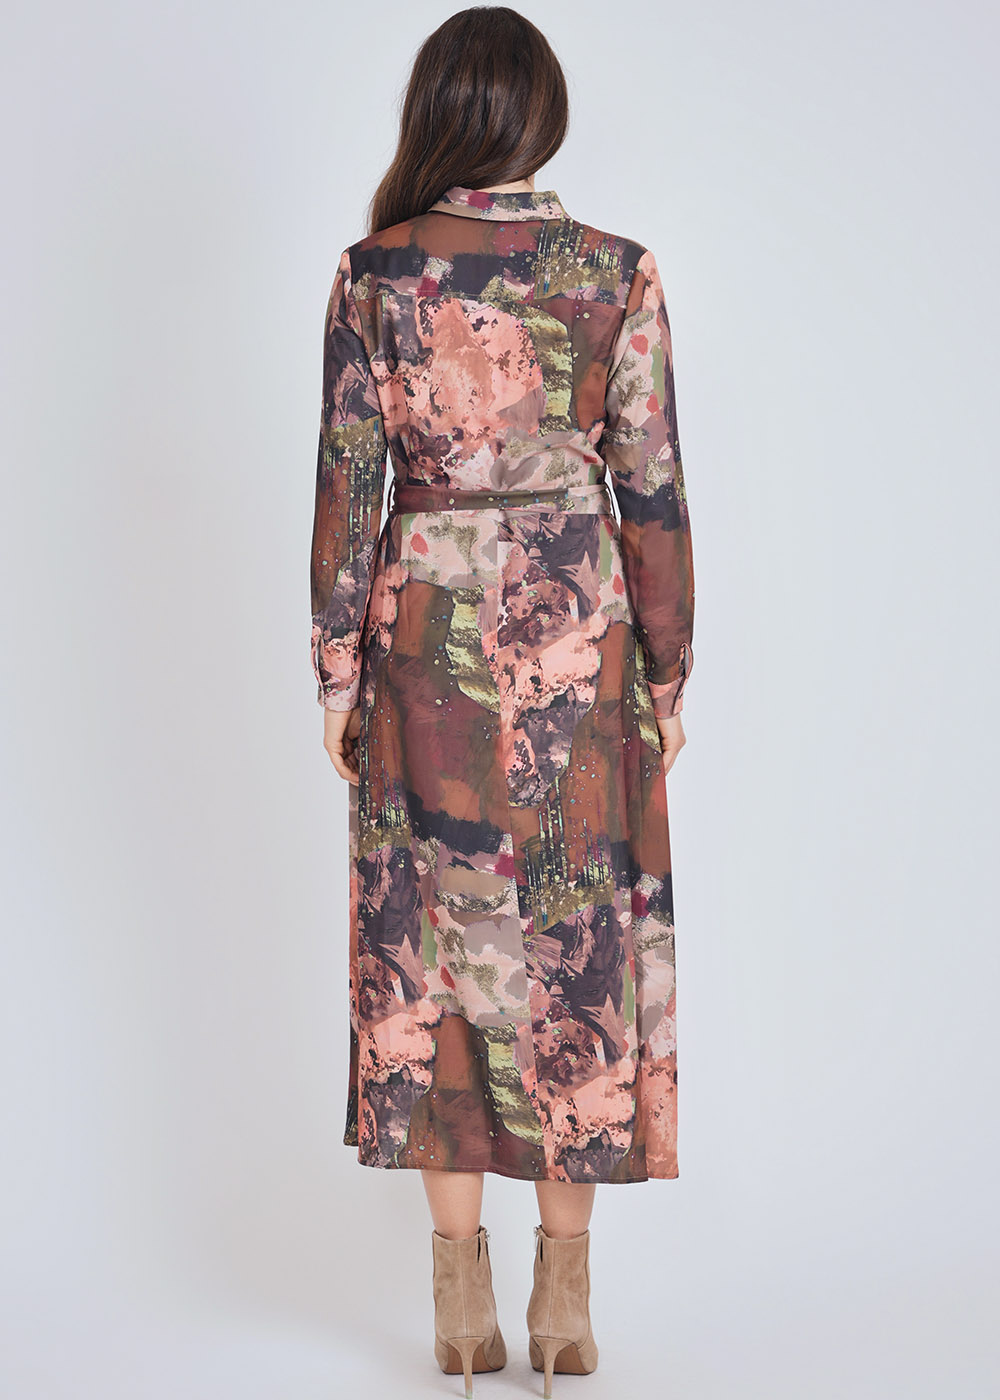 Belted Brown Dress with Abstract Print & Long Sleeves